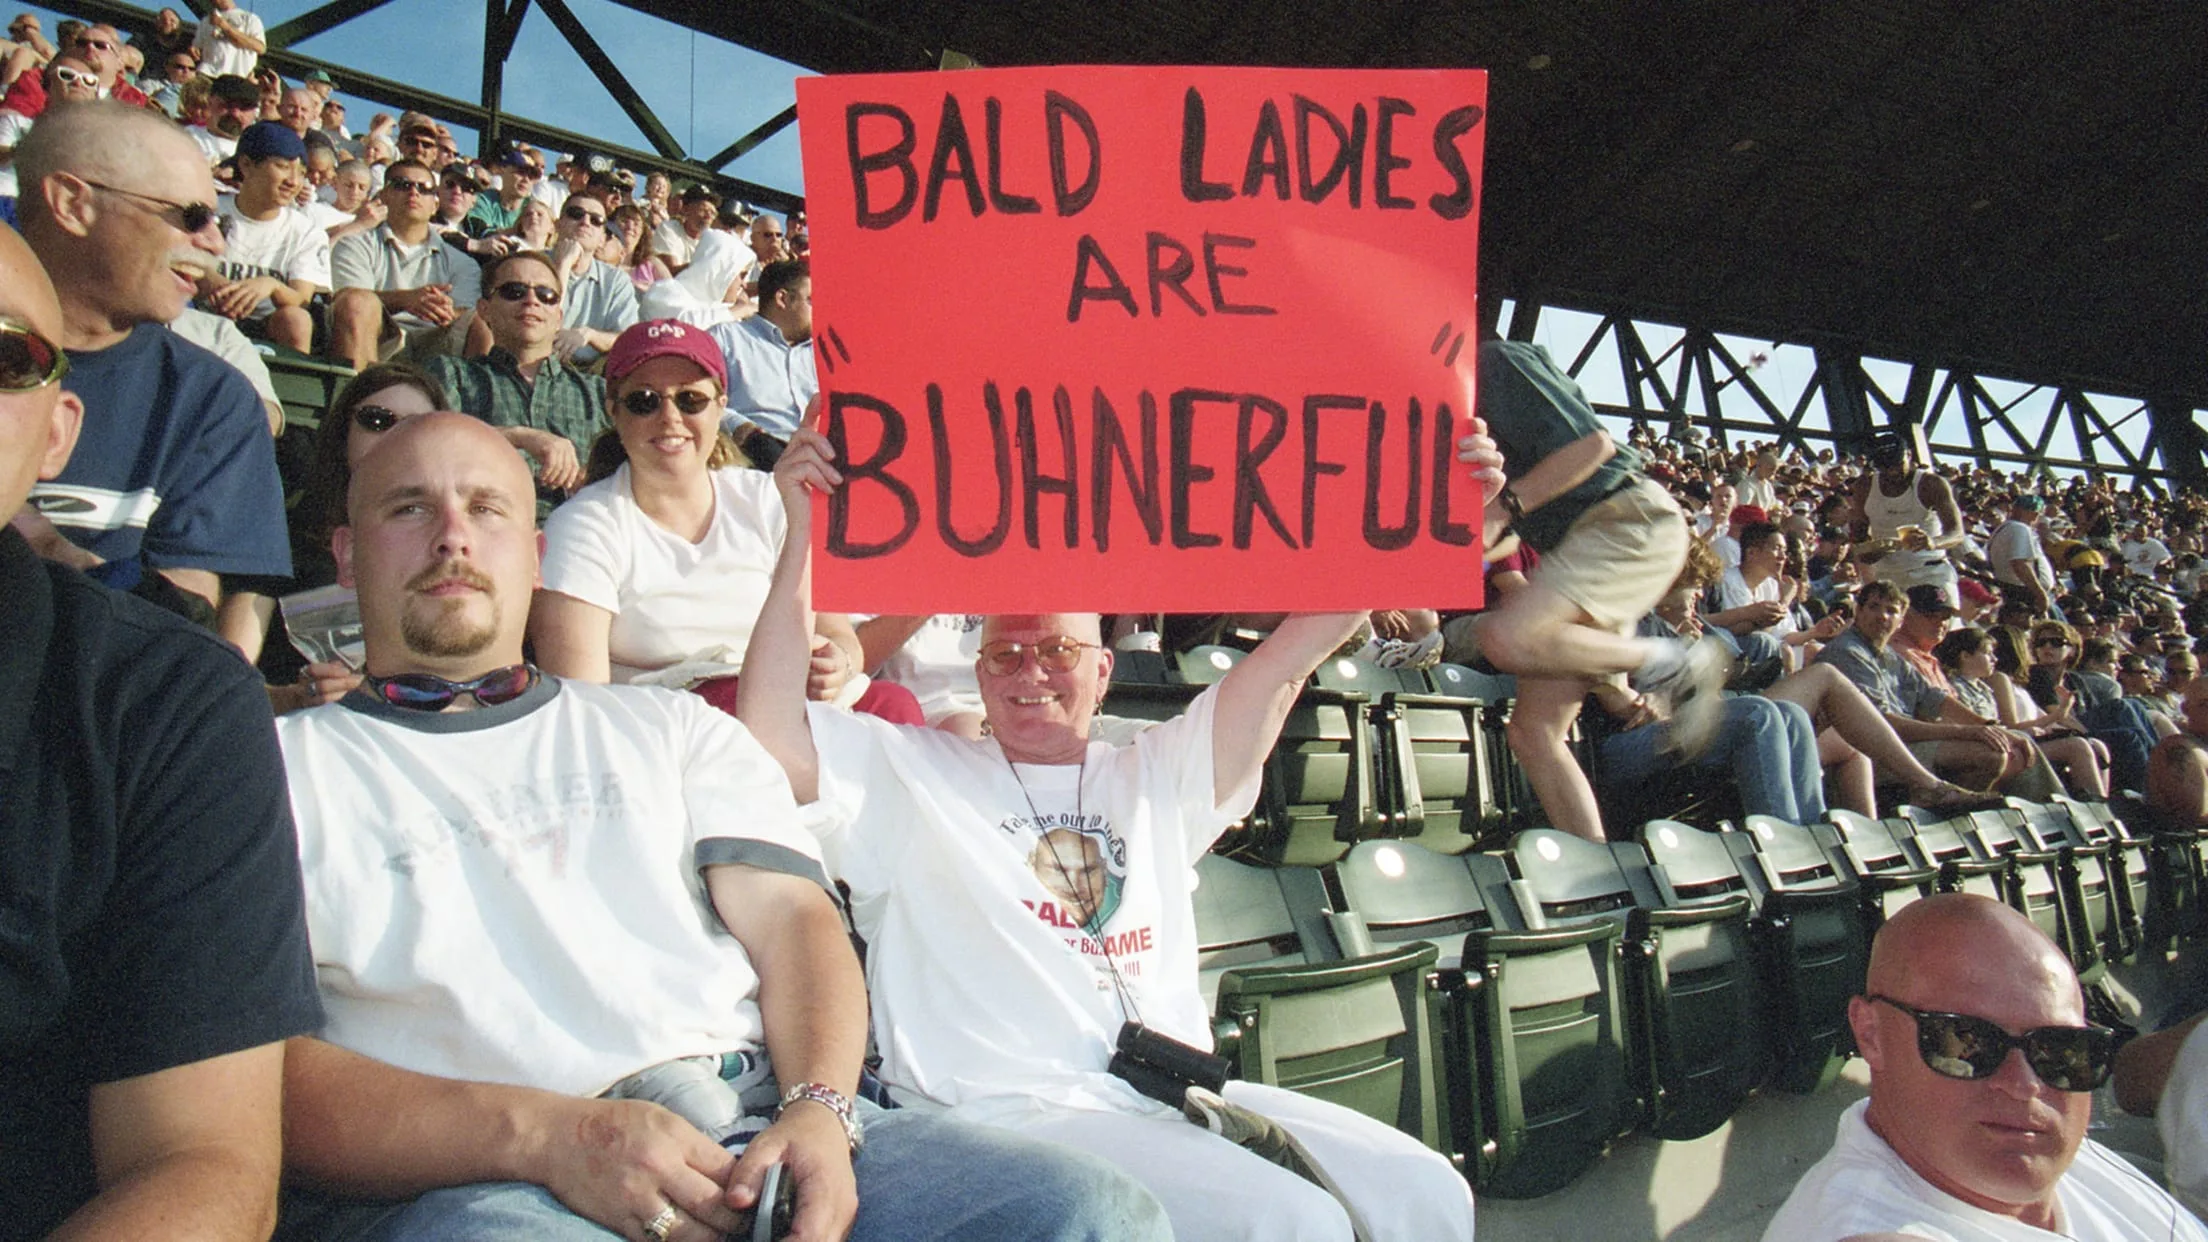 A bald woman holds up a sign that reads "BALD LADIES ARE BUHNERFUL."